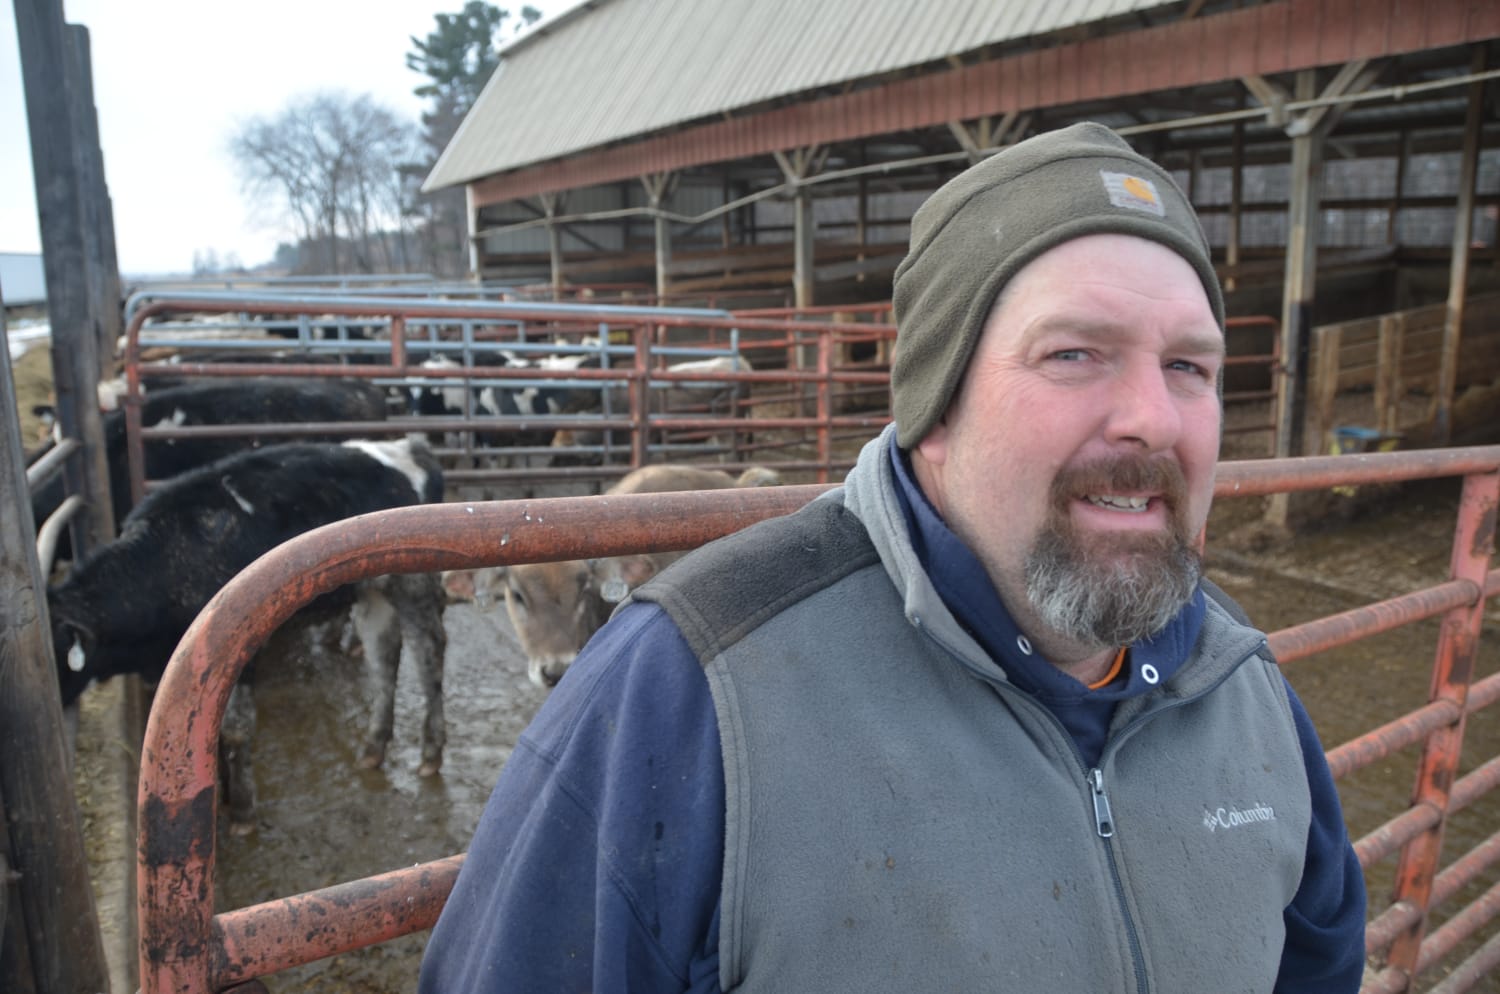 Could Supply Management Help Struggling Dairy Farmers?